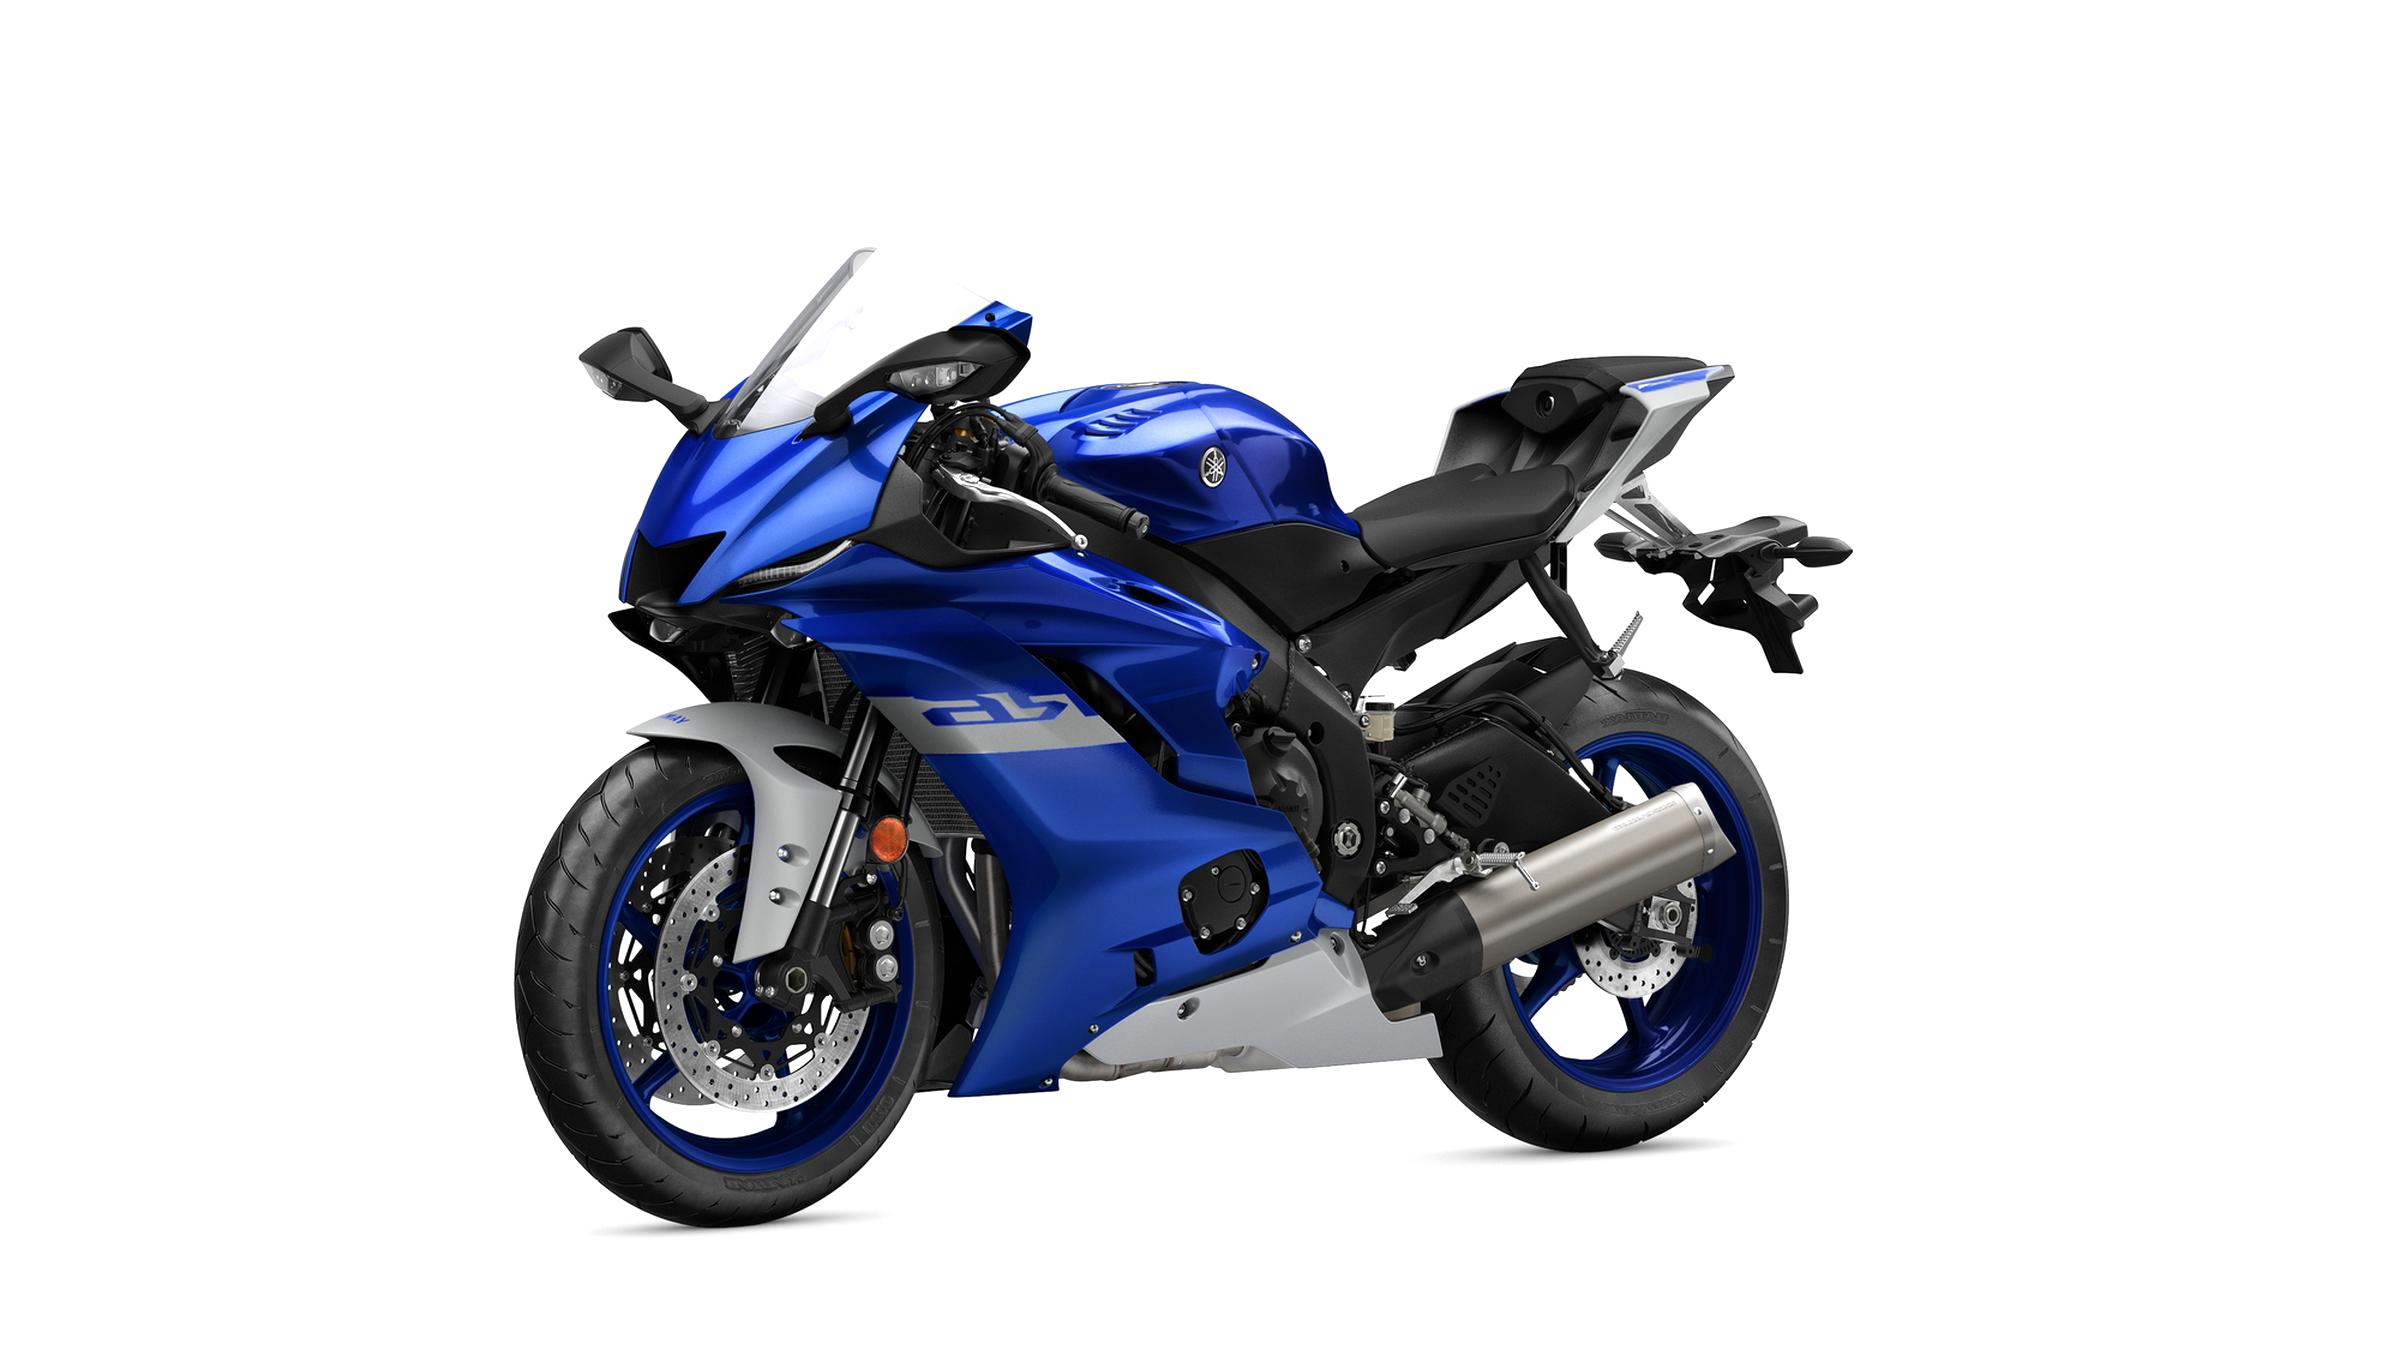 Yamaha R6 for sale in UK